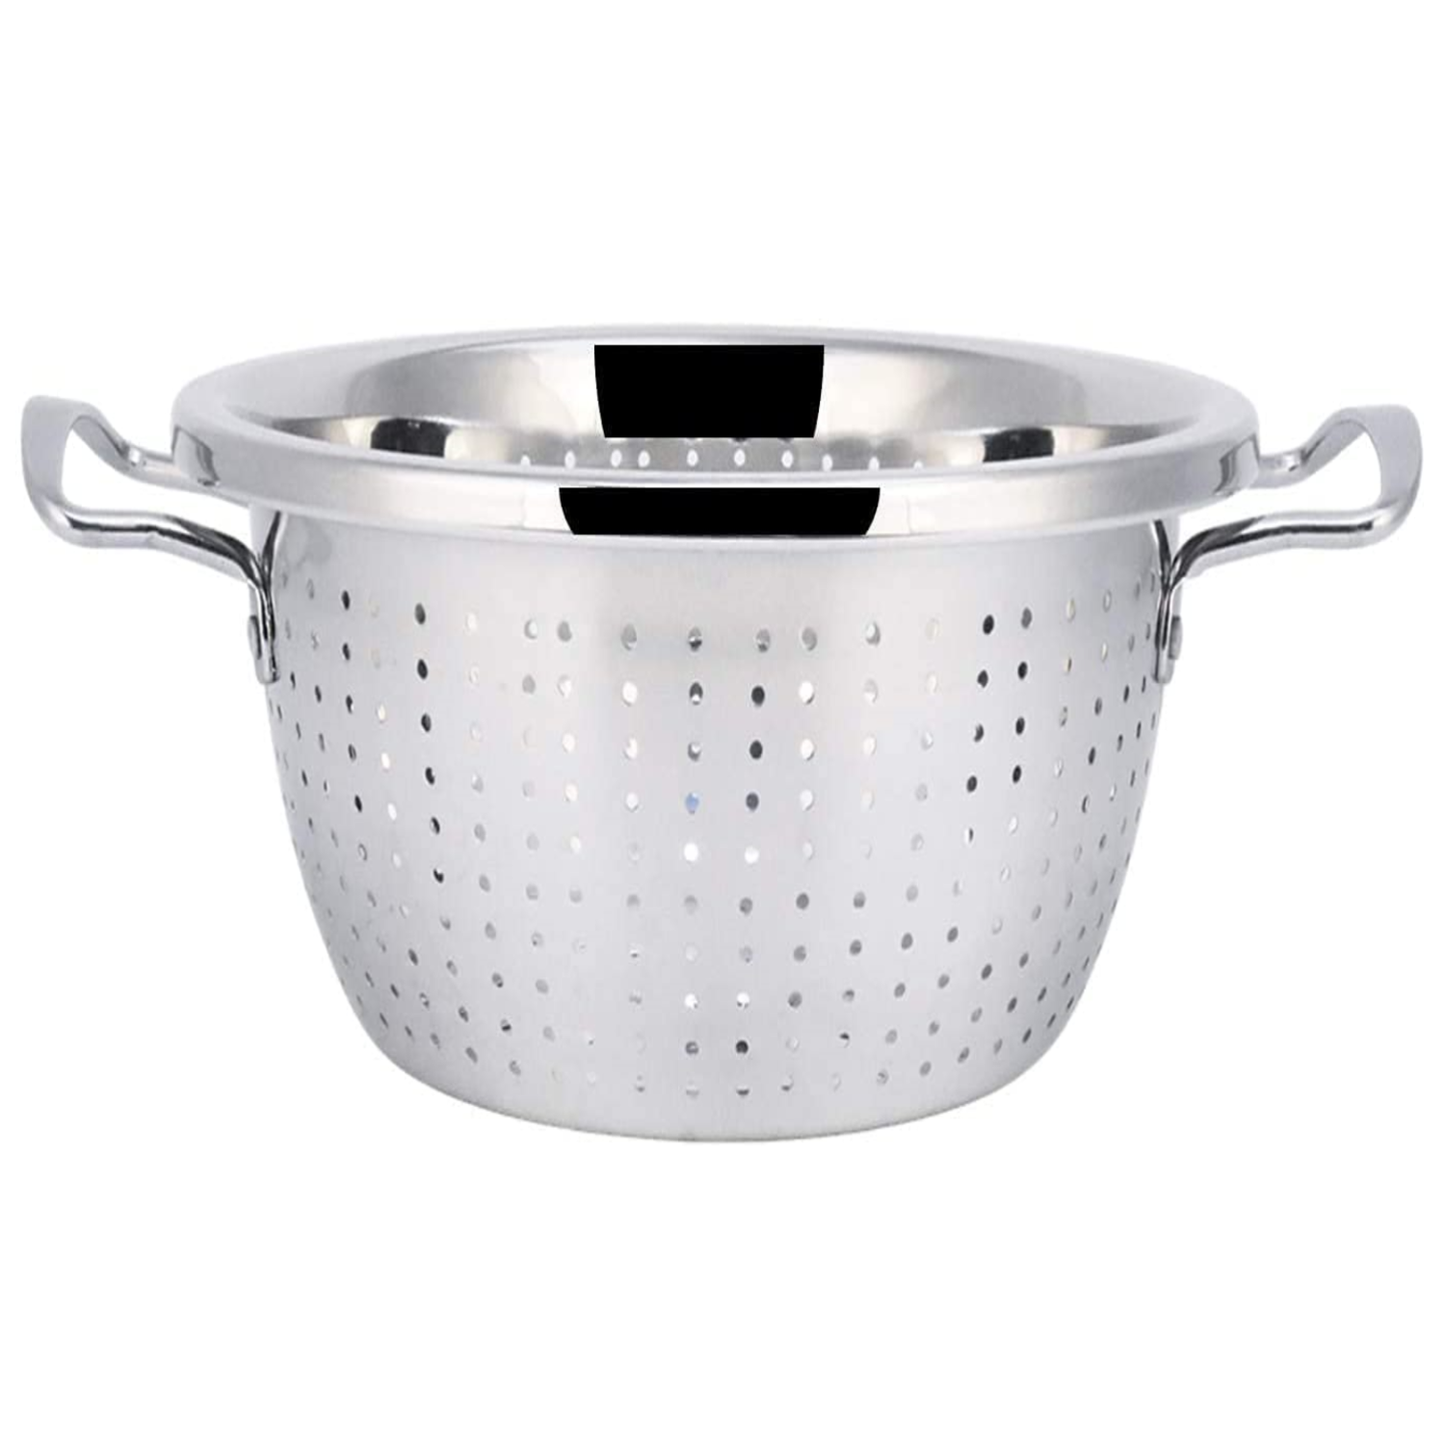 34cm Stainless Steel Tall Colander